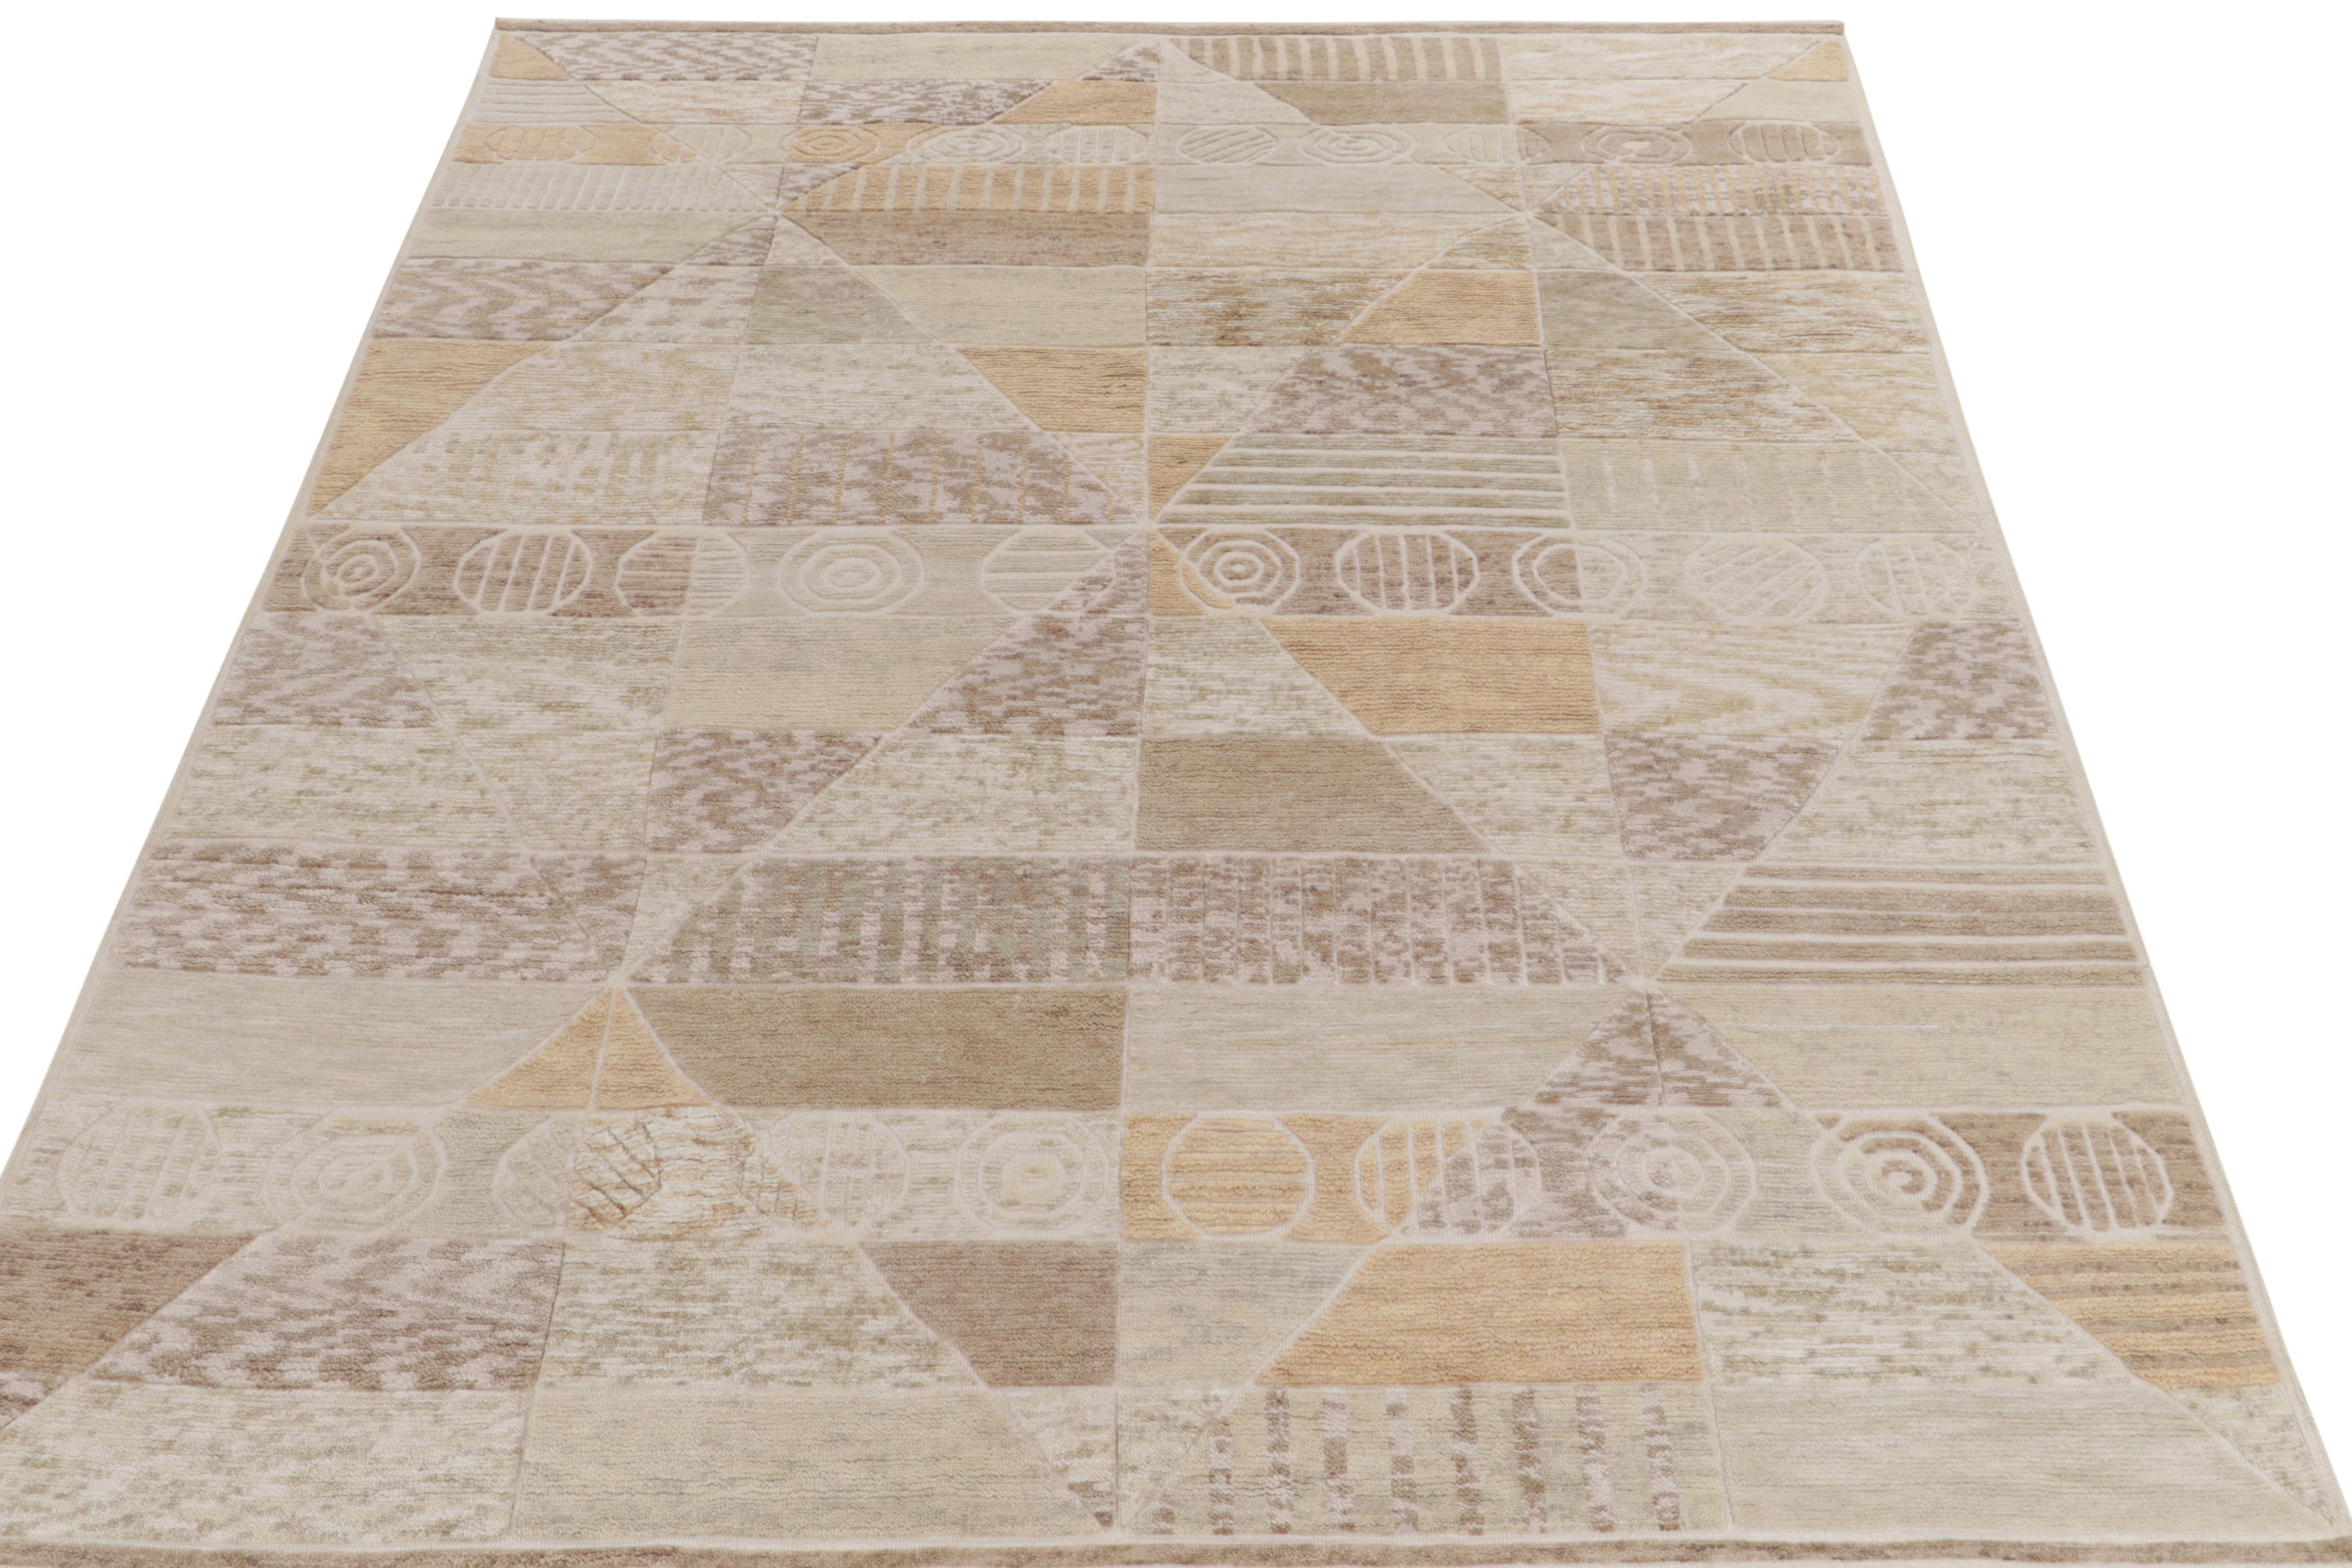 An 8x10 handwoven imagination from Rug & Kilim’s award winning Scandinavian selections. The Swedish style rug beams with a refined geometric pattern in a lustrous beige, gray and white pattern complementing the healthy pile. The piece further enjoys